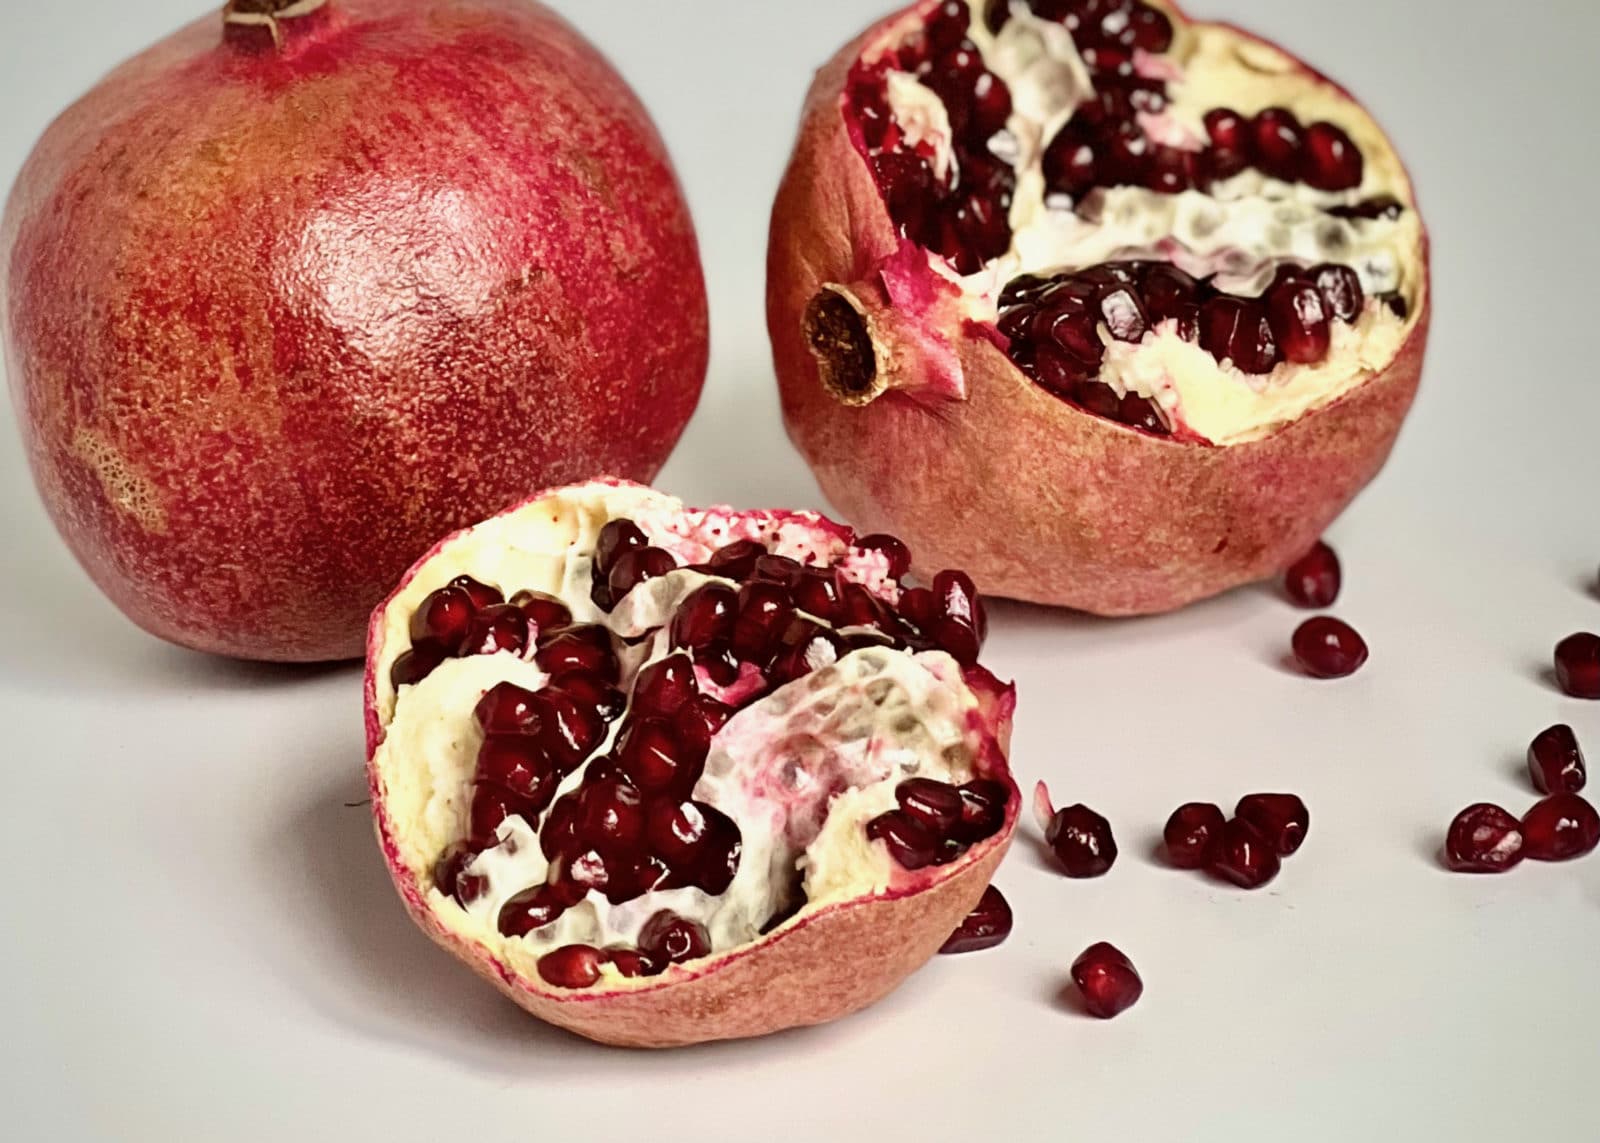 Replica Surface Pomegranate and Seeds